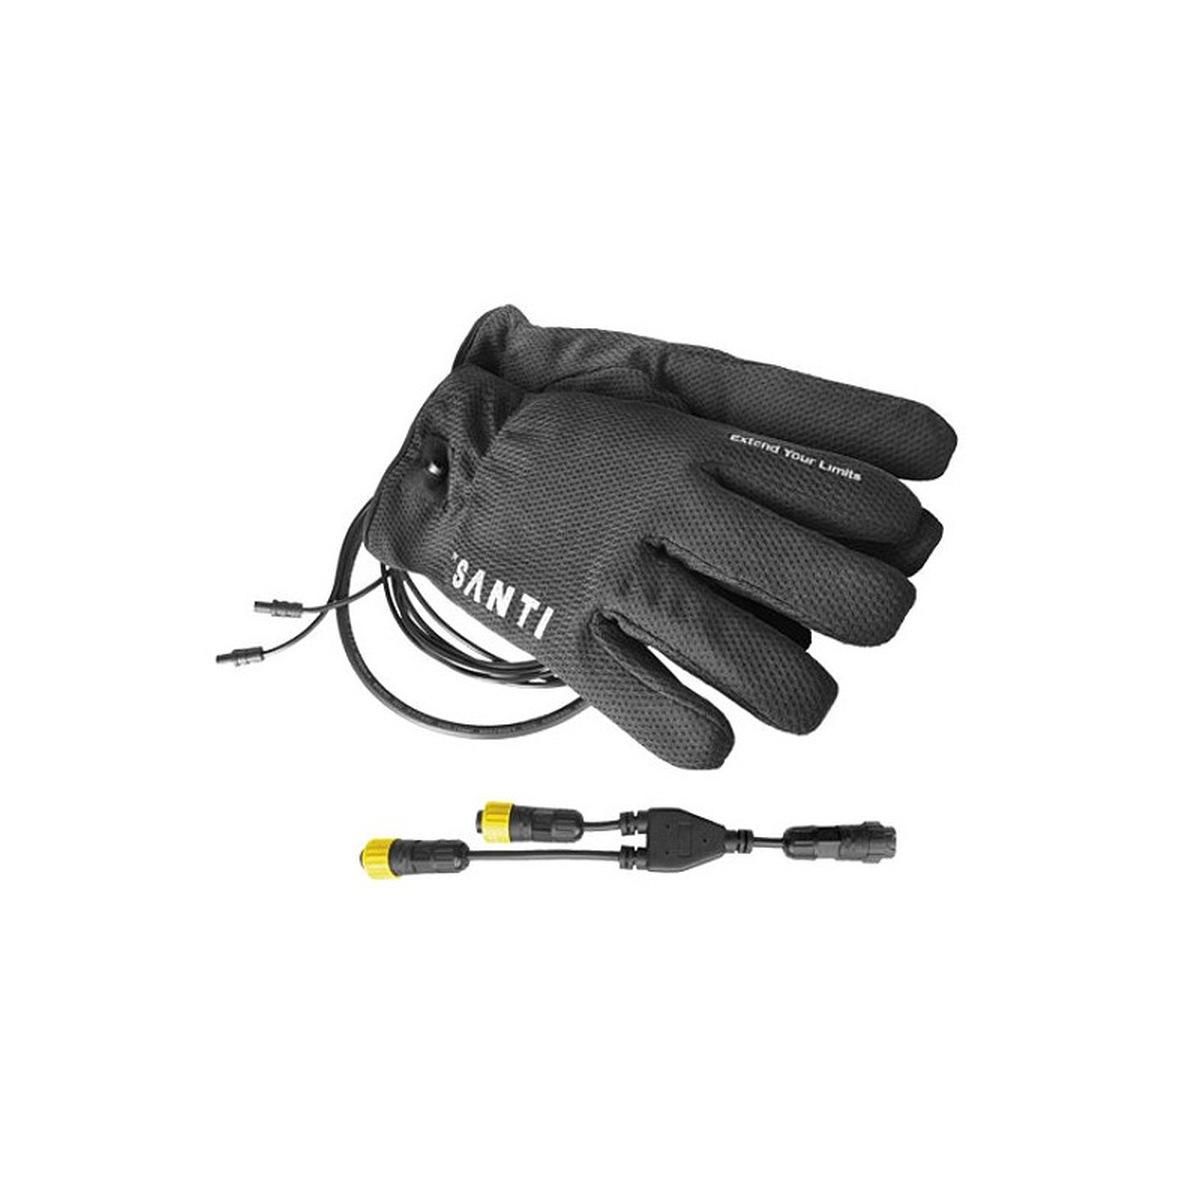 Heating system warming gloves